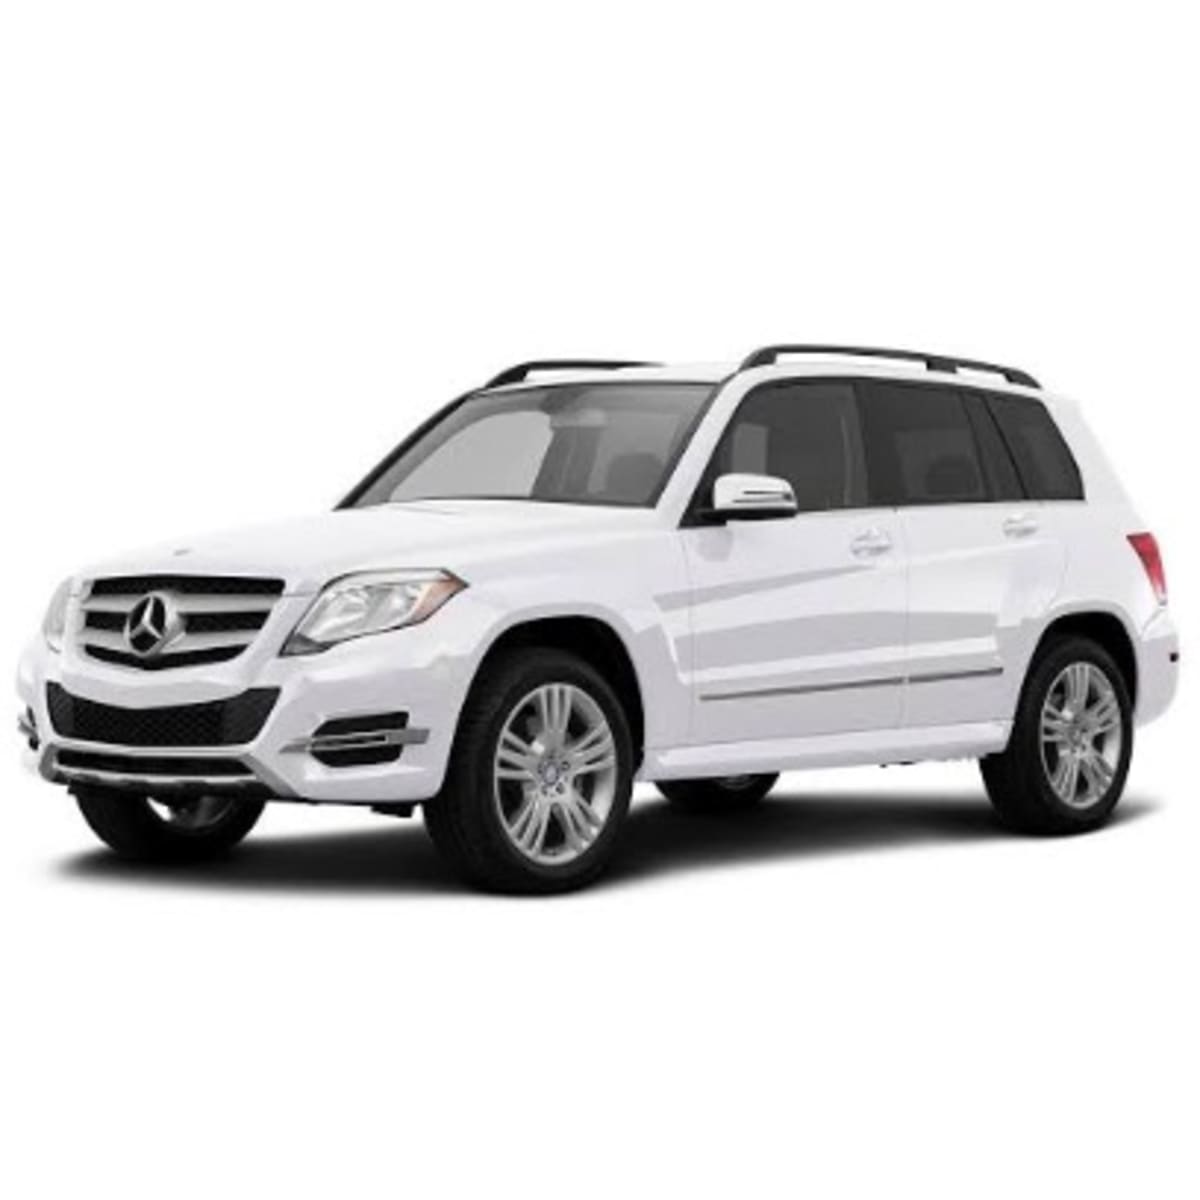 Car Cover For Mecedes Benz Glk 350 And Similar SUVs